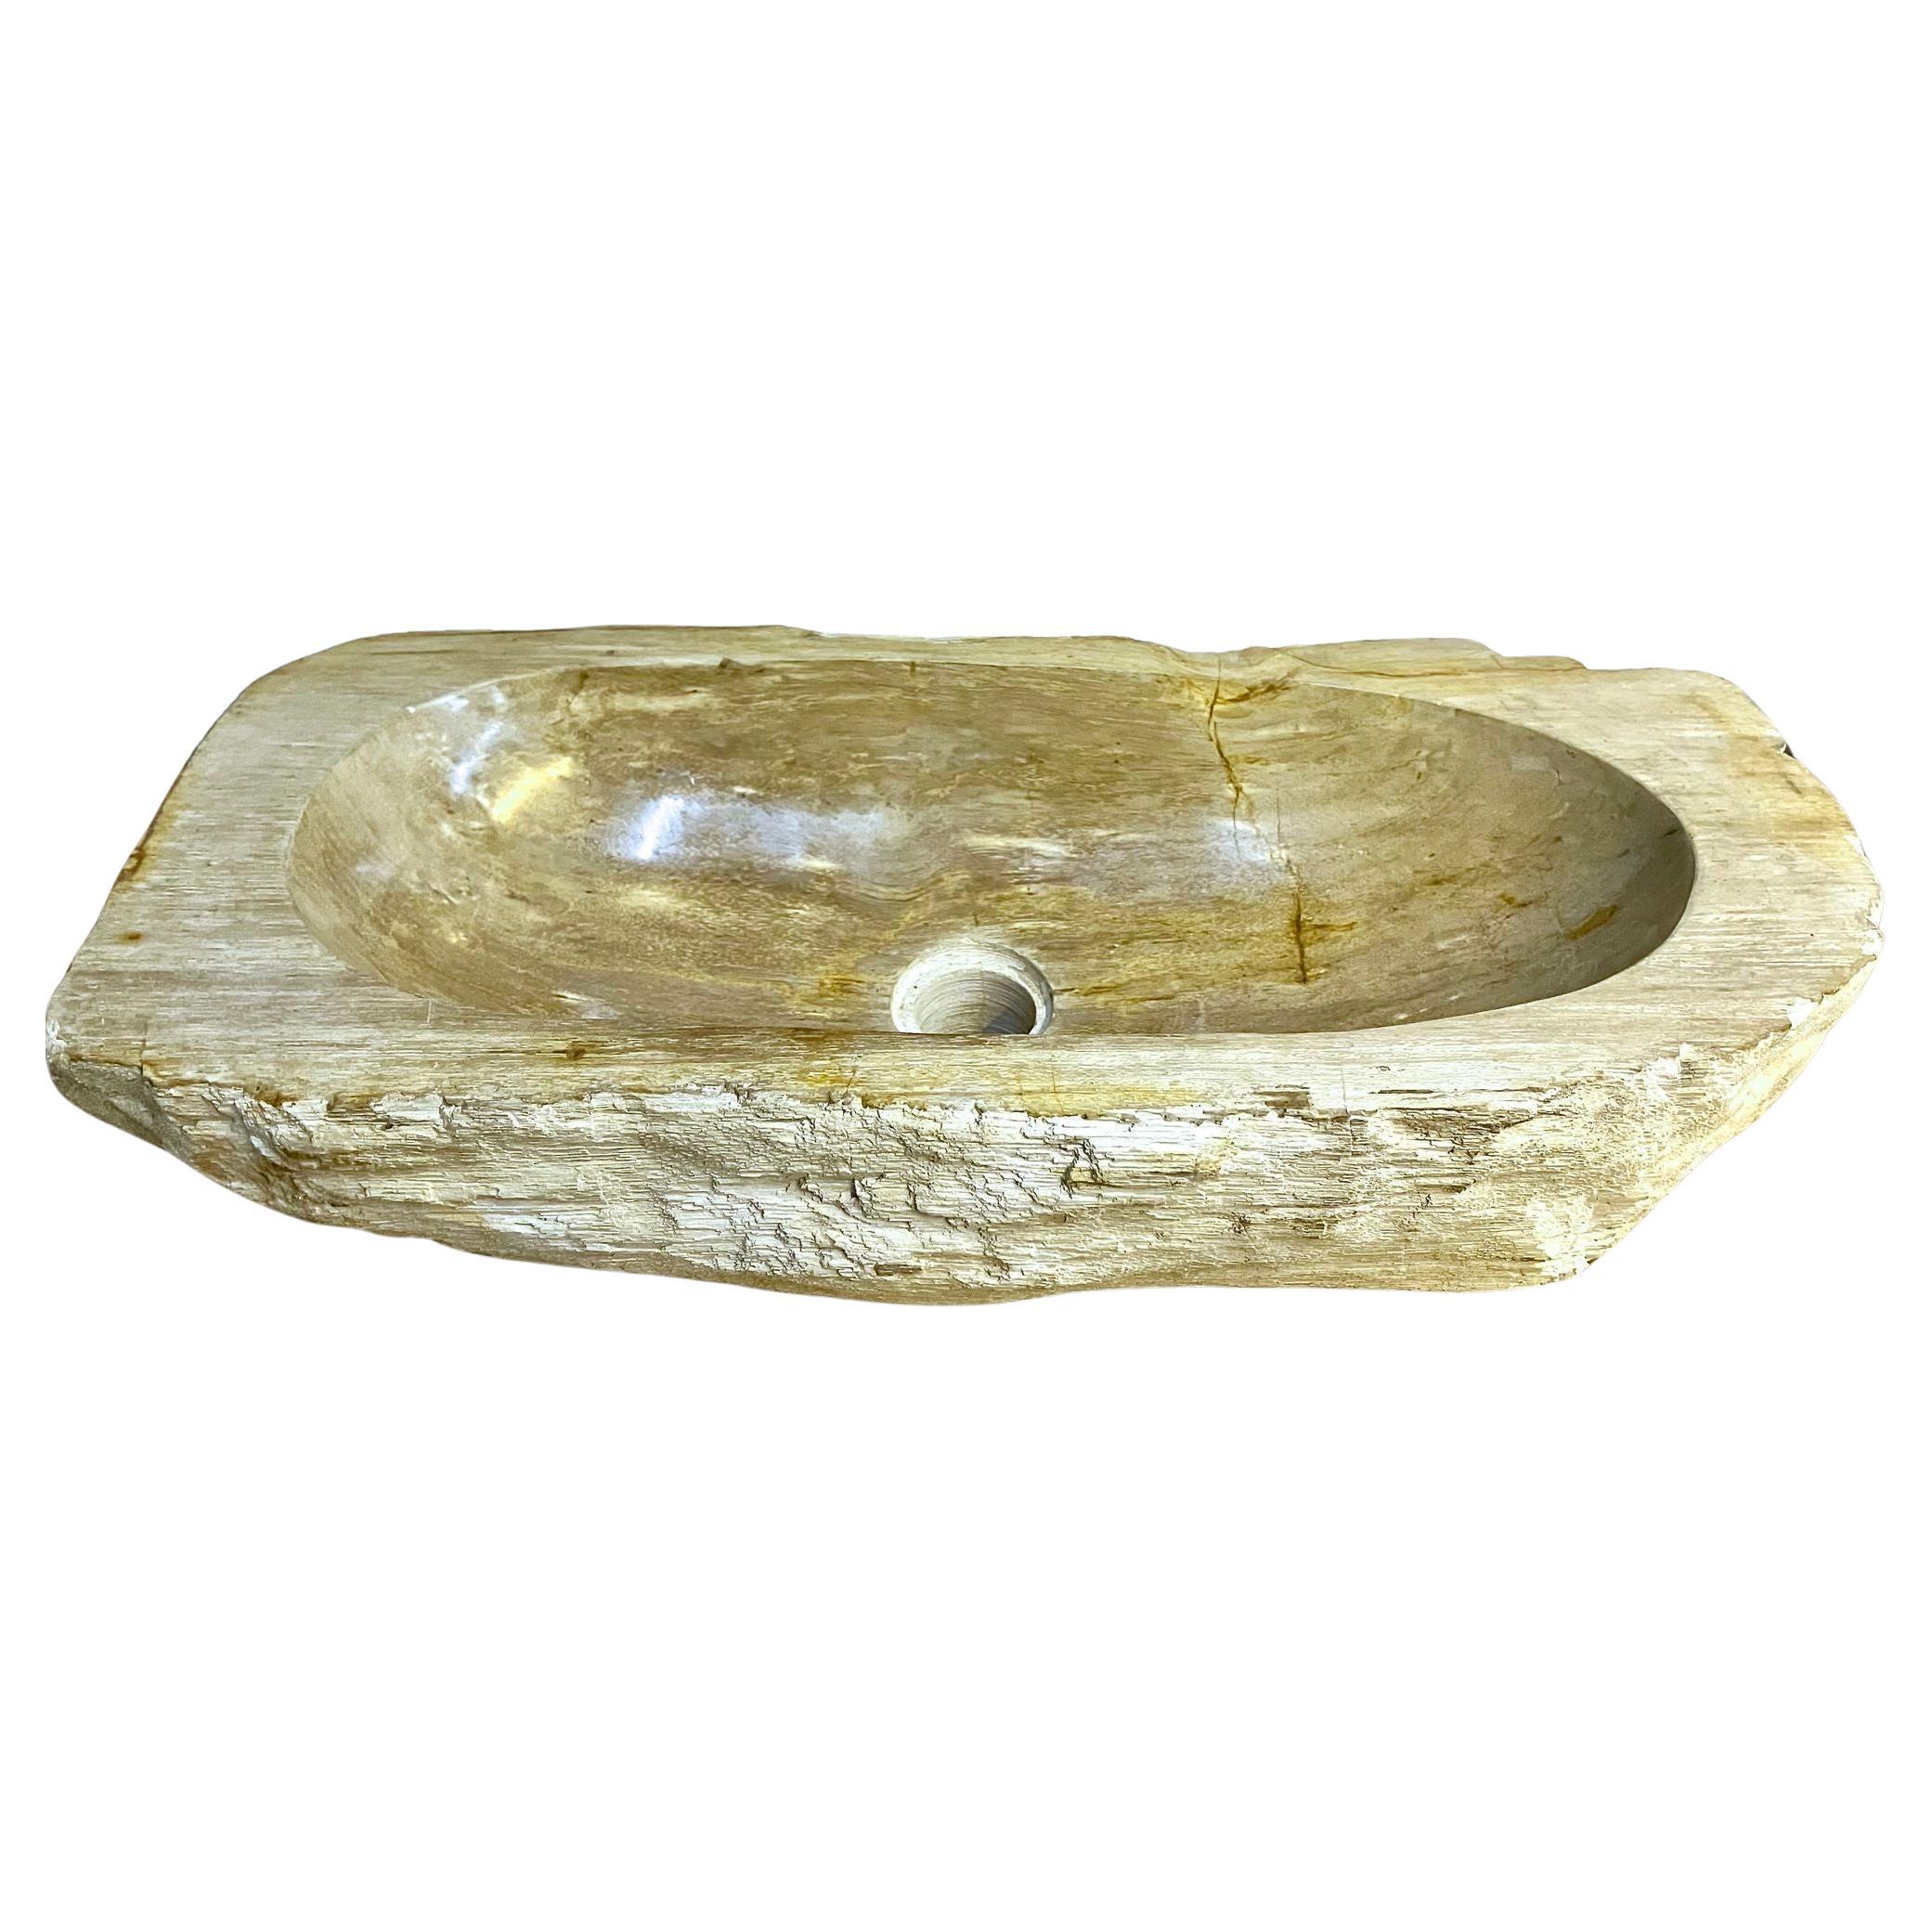 Petrified Wood Sink Grey/ Beige Tones, Polished - Top Quality, IDN 2023 For Sale